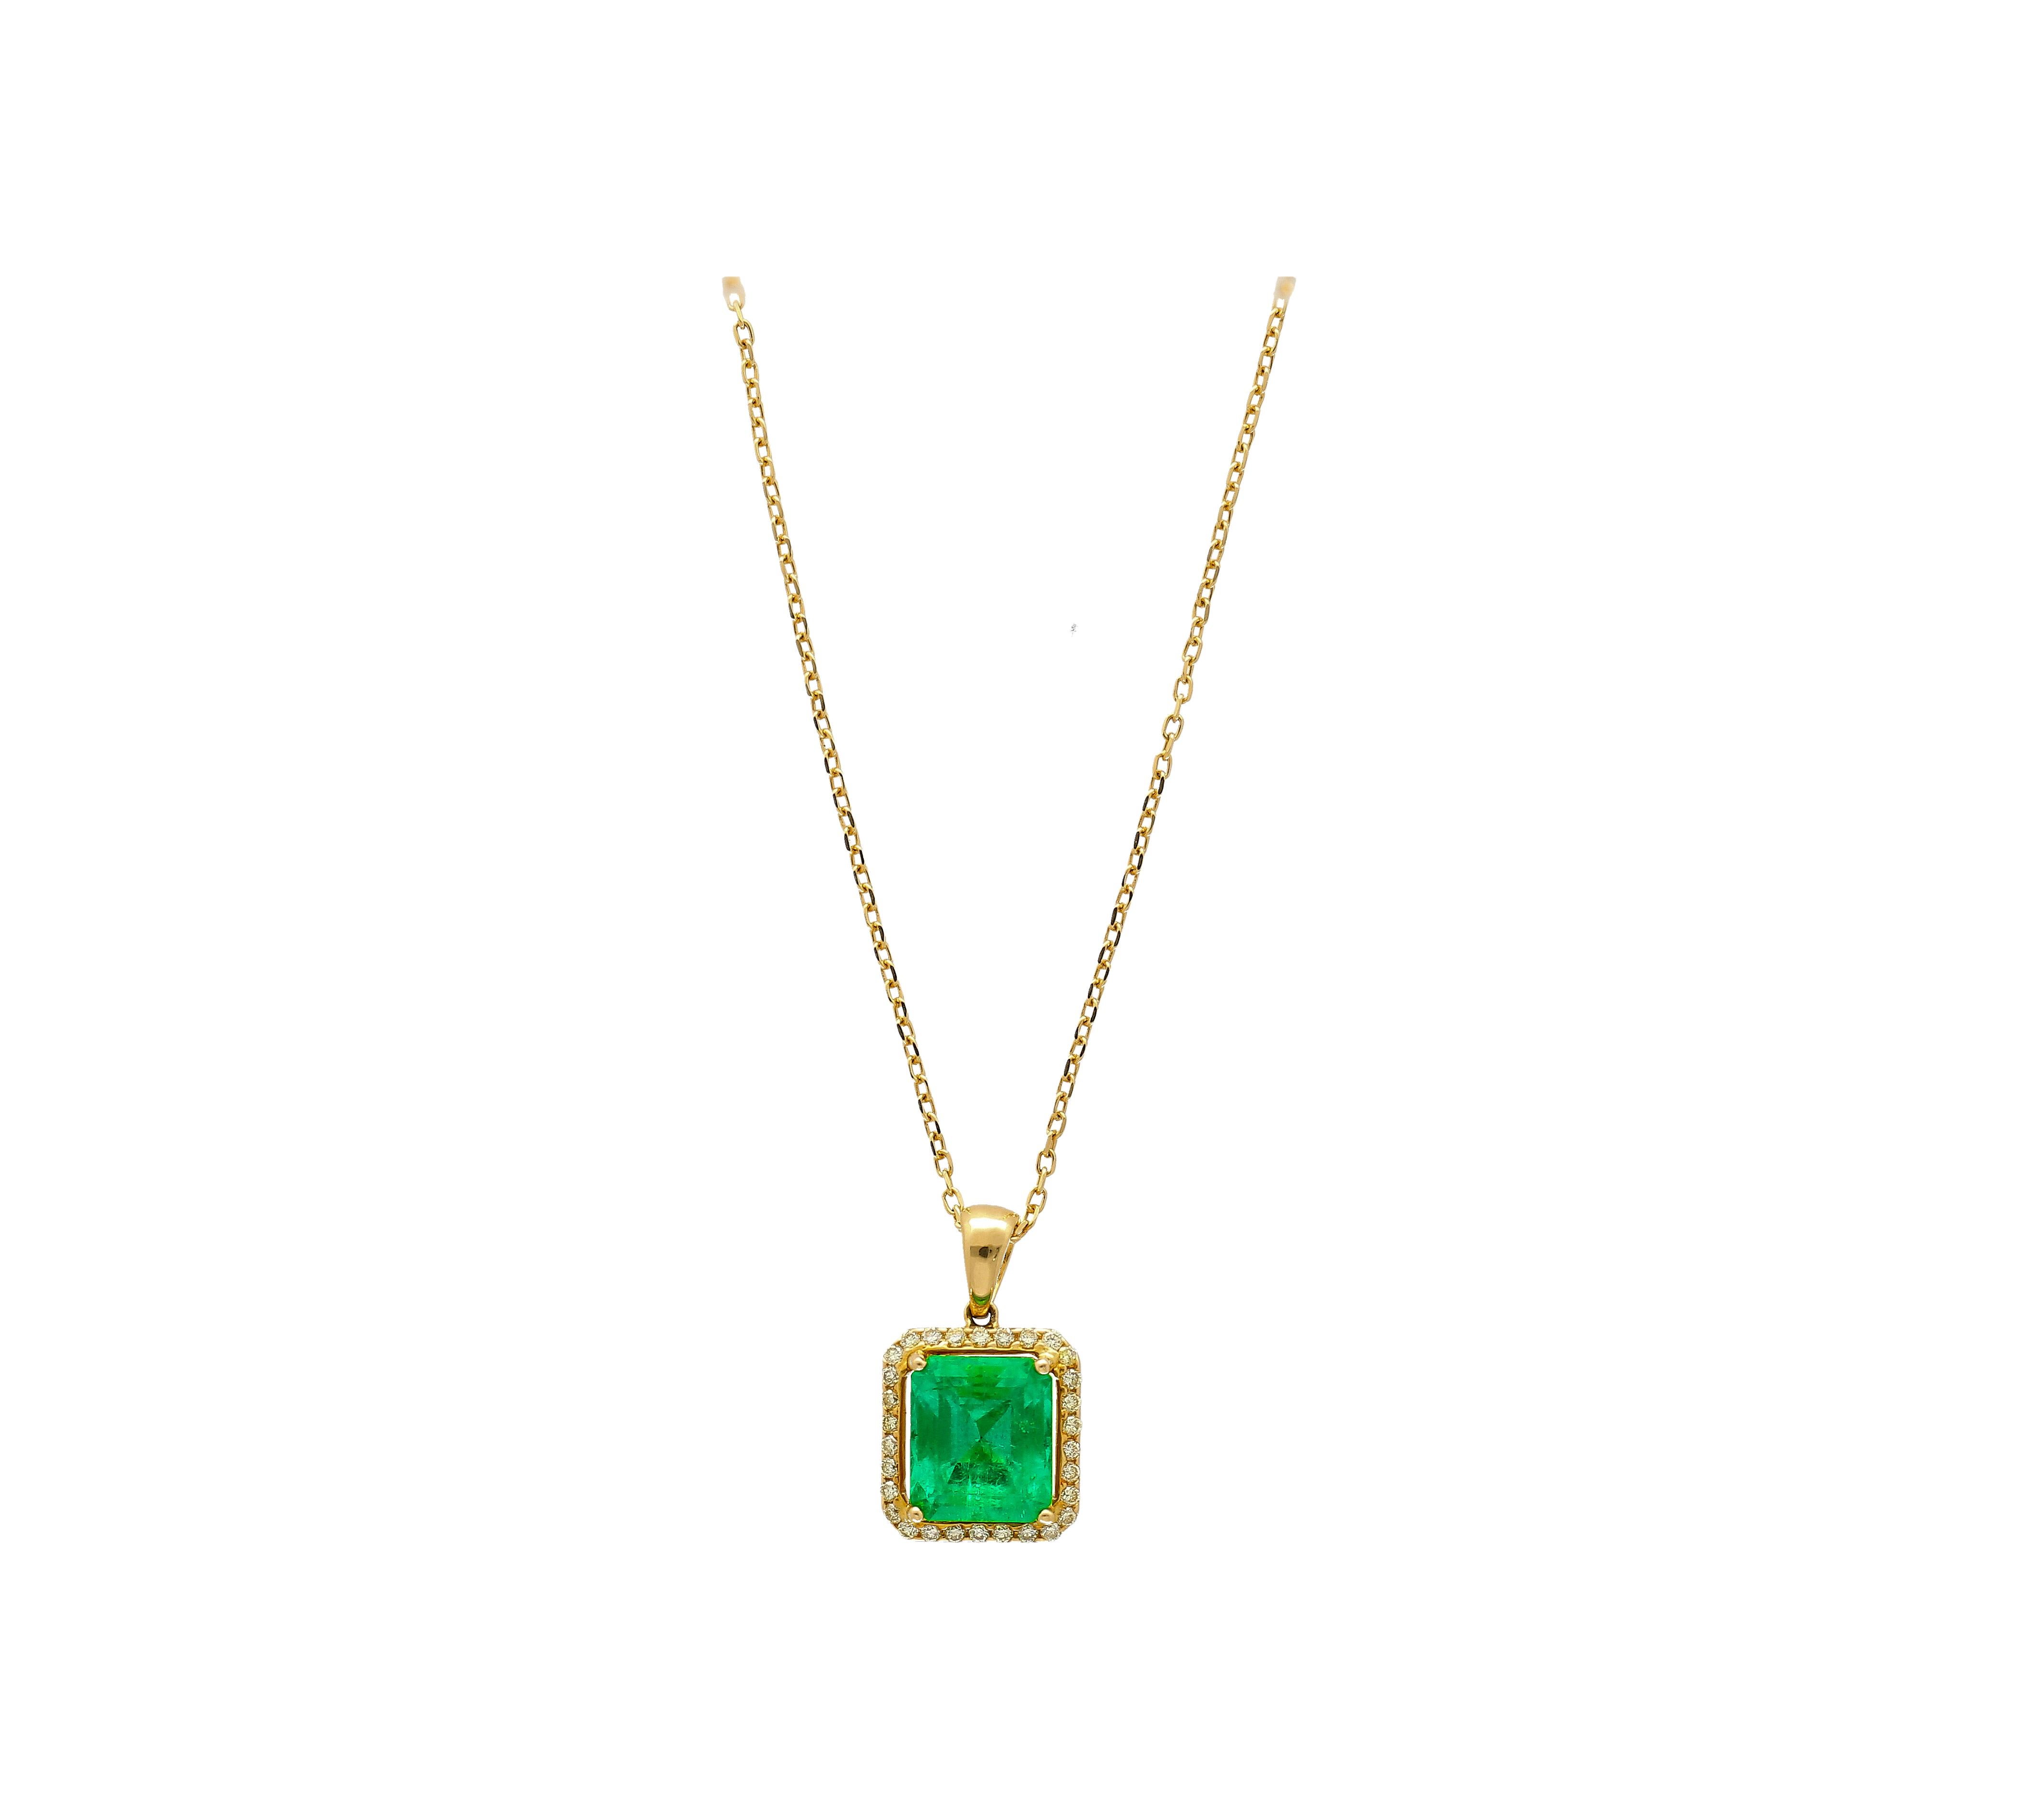 5.42 Carat Natural Emerald Pendant Necklace with Yellow Diamond Halo in 18k Gold In New Condition For Sale In Miami, FL